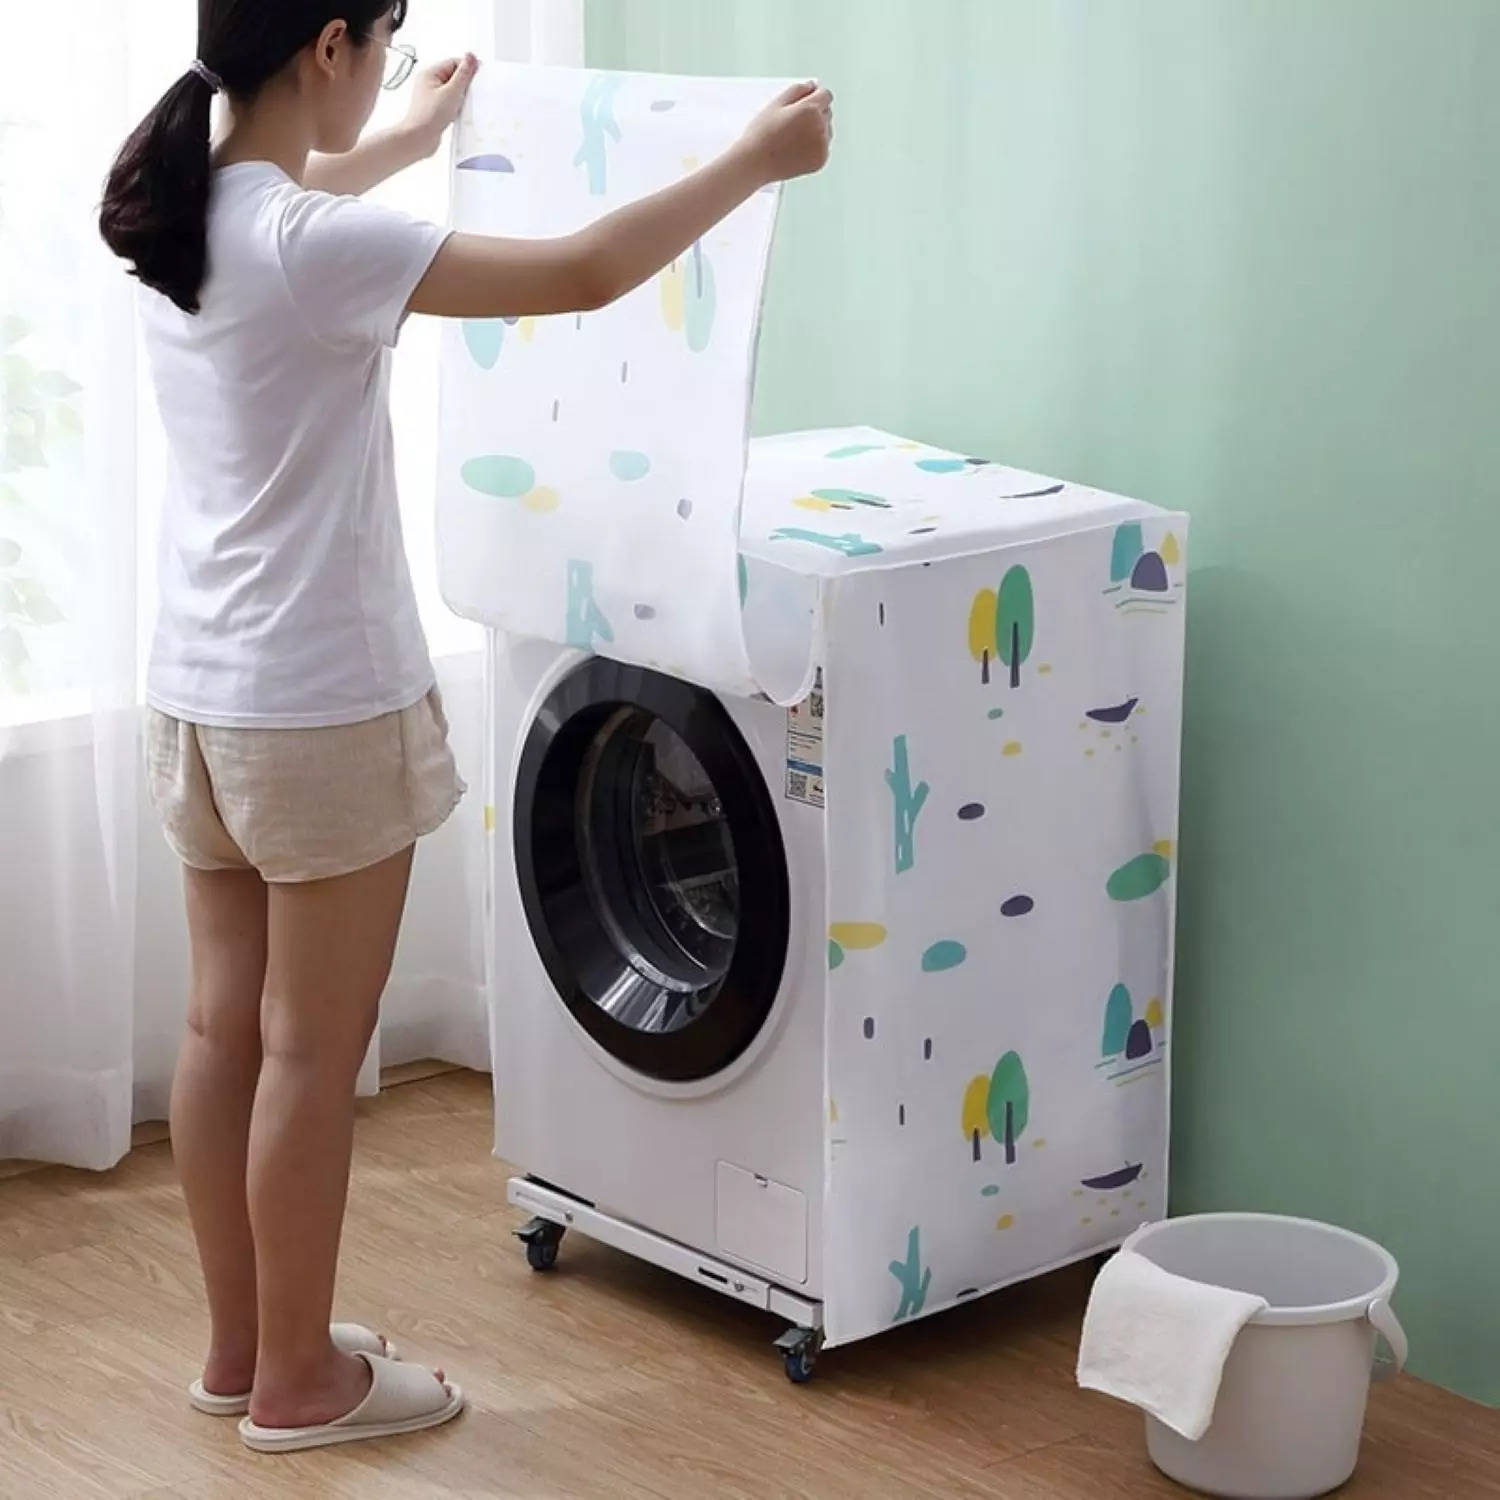 Best washing machine covers under 1000 to protect your appliance and enhance its lifespan:Image